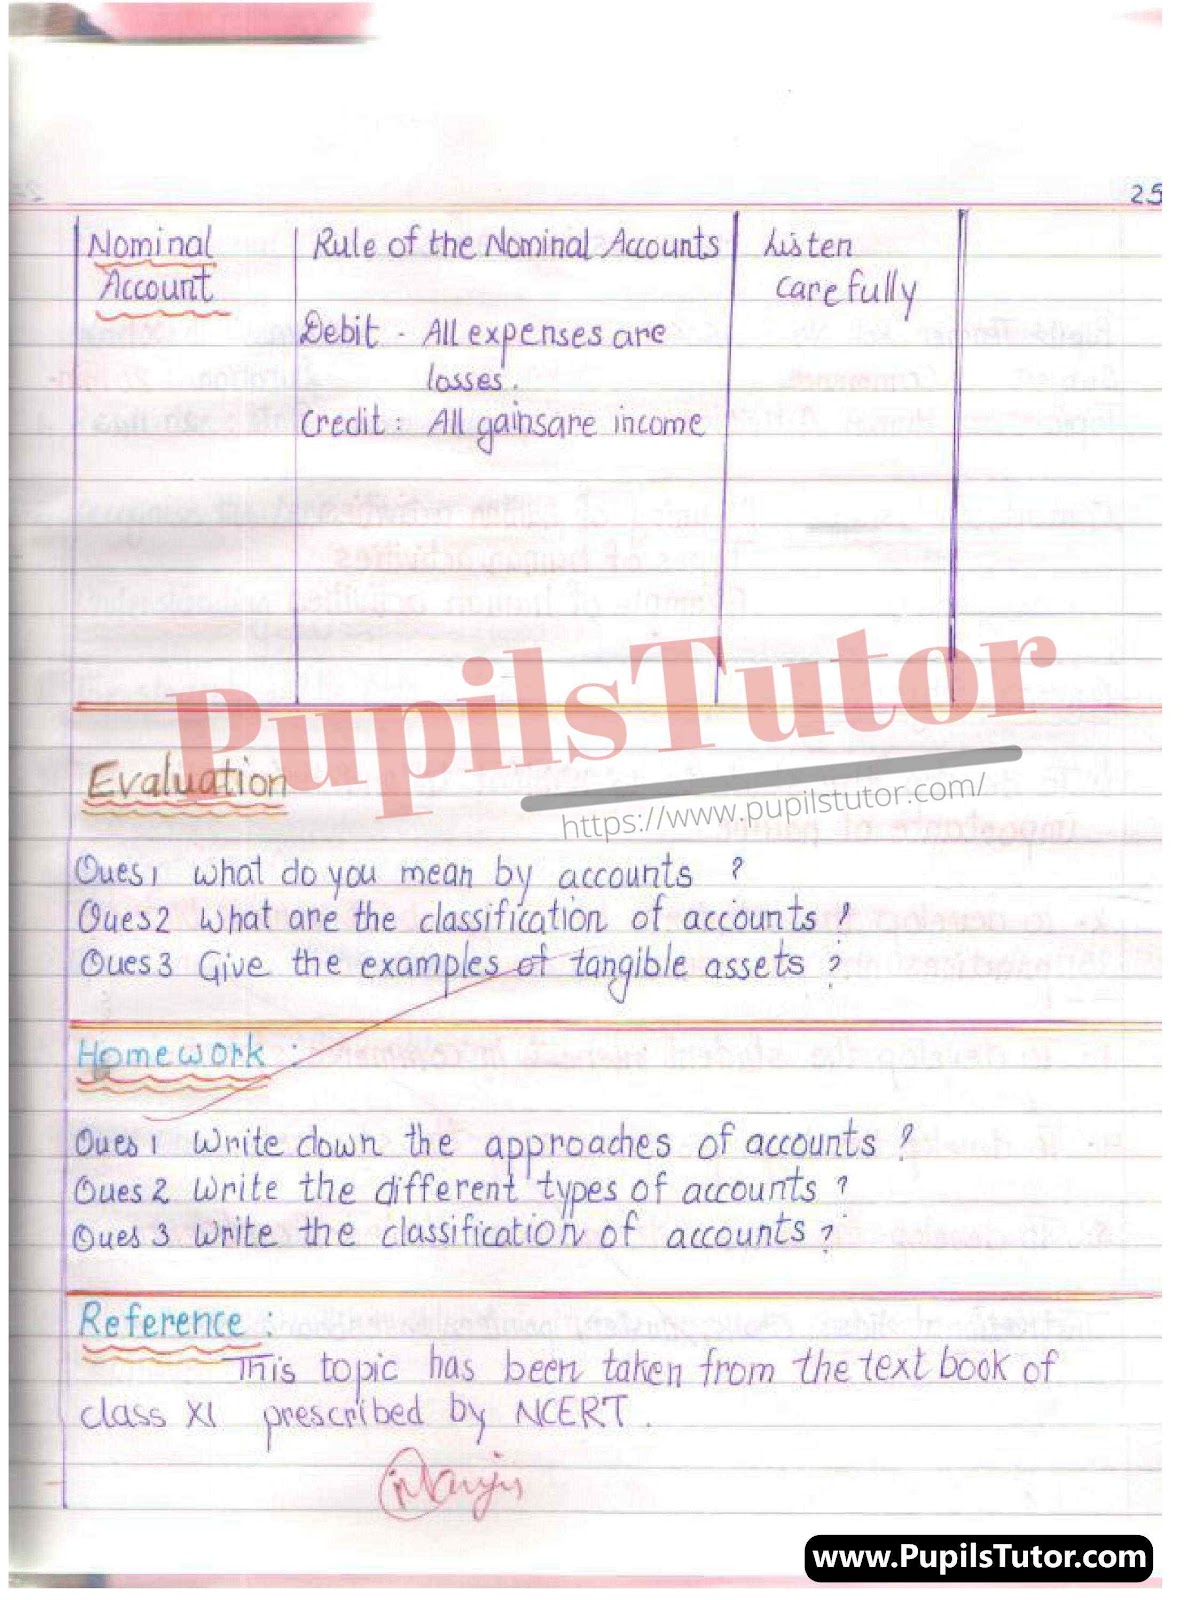 Real School Teaching 11 And 12th Class Free Accountancy Lesson Plan Basics Of Accounting [Page And Image Number 7] – www.pupilstutor.com